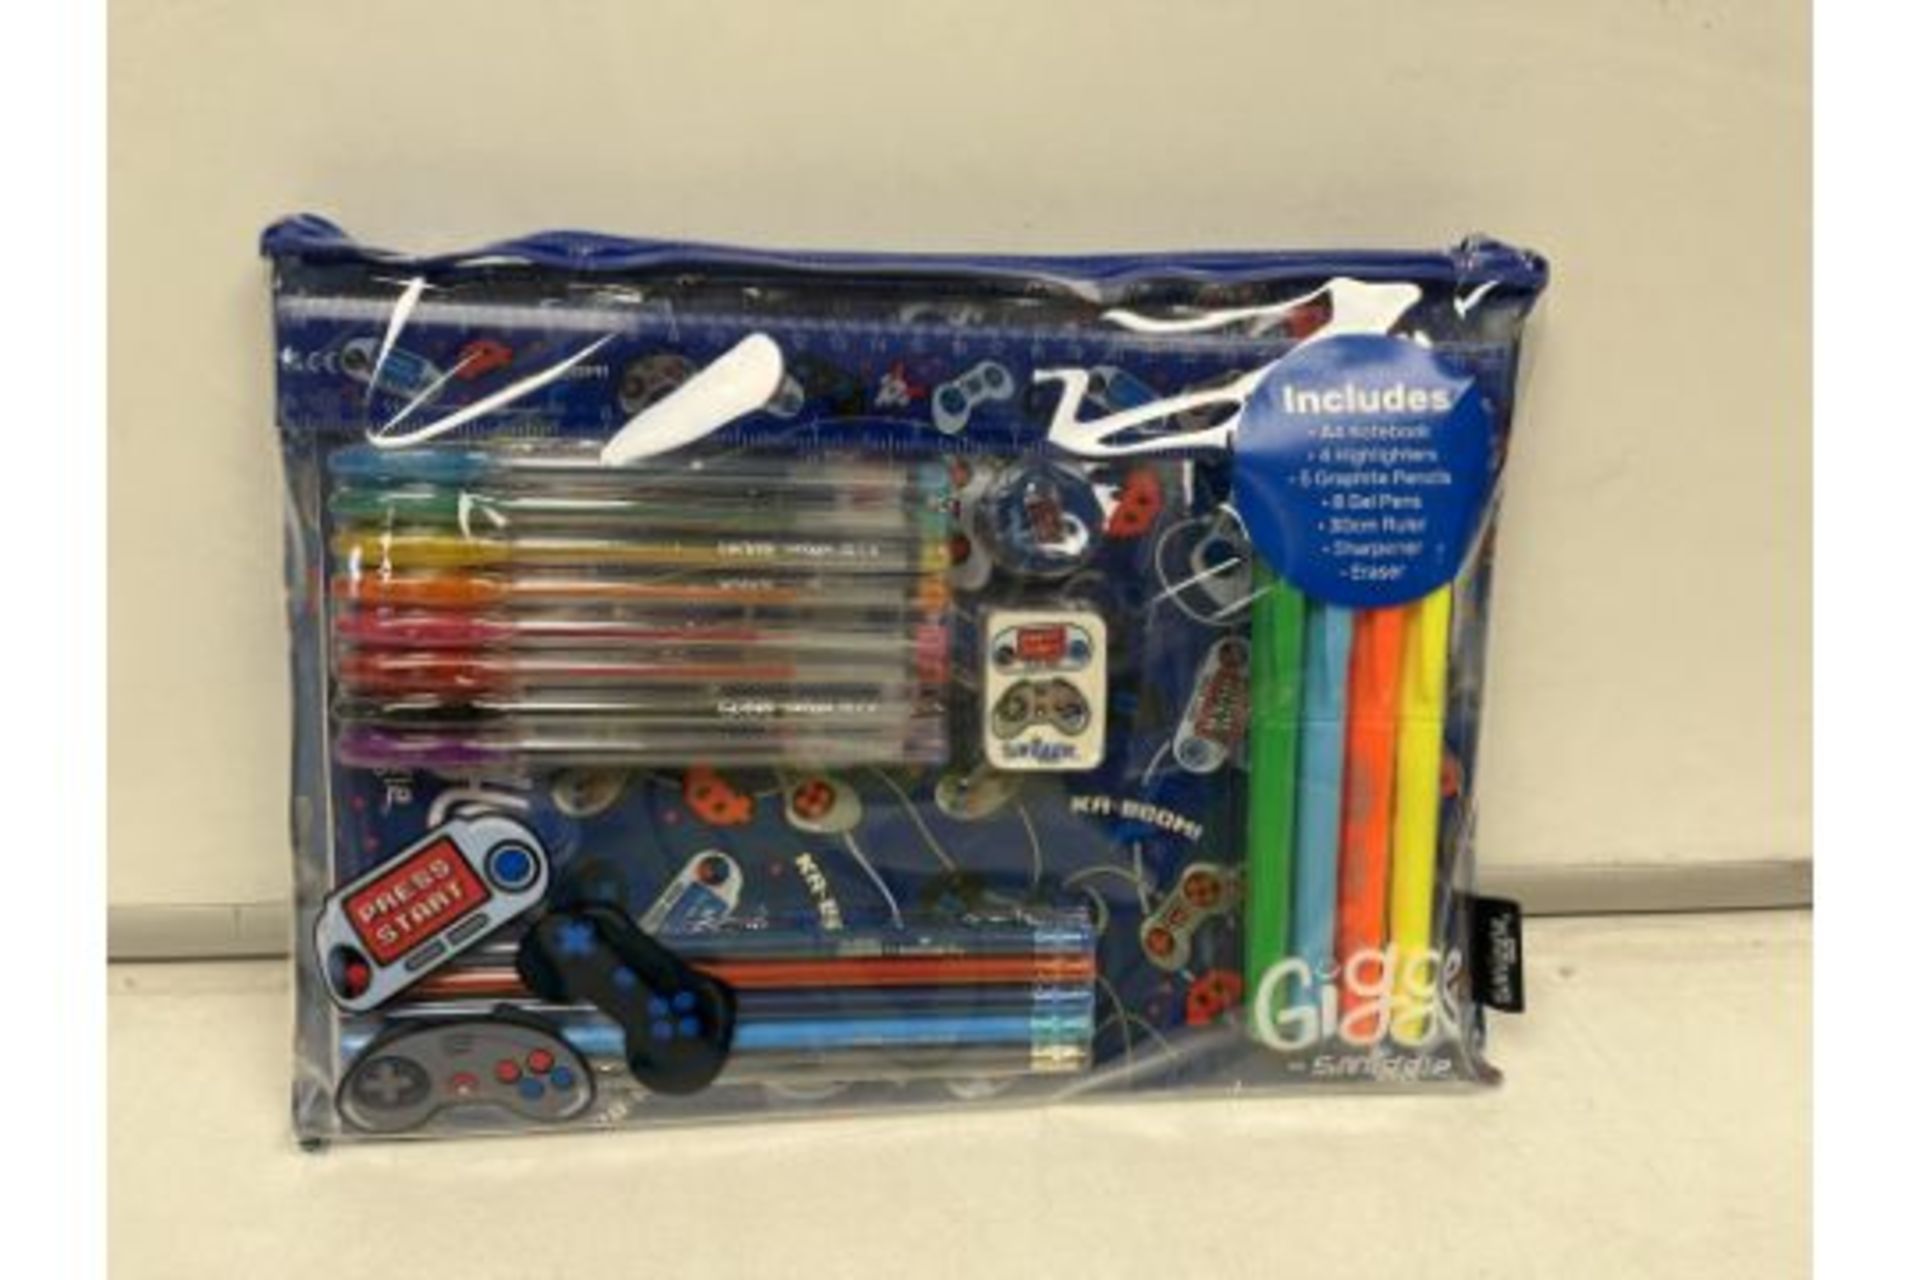 10 X NEW PACKAGED GIGGLE BY SMIGGLE STATIONARY PACKS. EACH INCLUDES: A4 NOTEBOOK, 4 HIGHLIGHTERS,